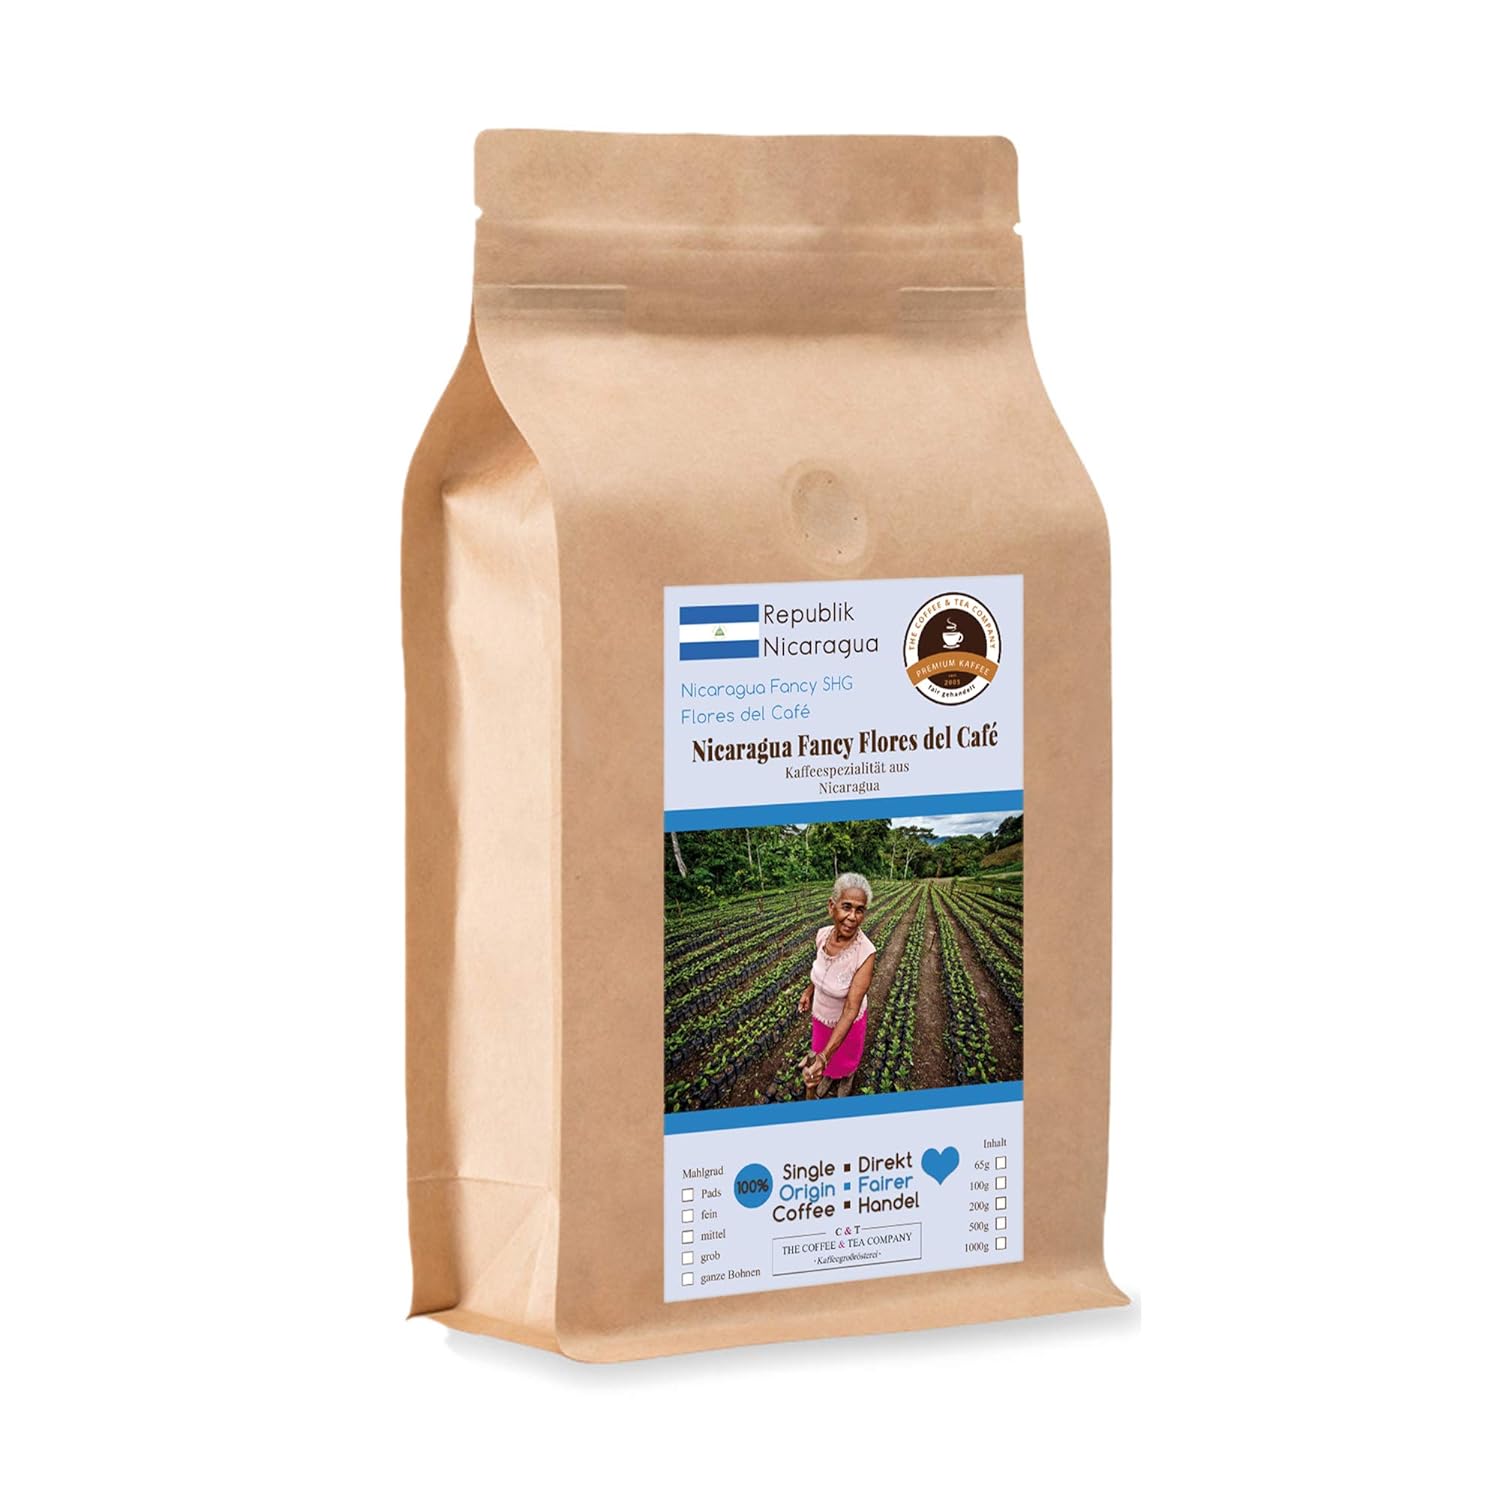 Coffee Globetrotter - Coffee with Heart - Nicaragua Fancy Flores del Café - 1000 g Very Fine Ground - Top Coffee from the Women\'s Fund Project Fair Traded Supports Social Projects